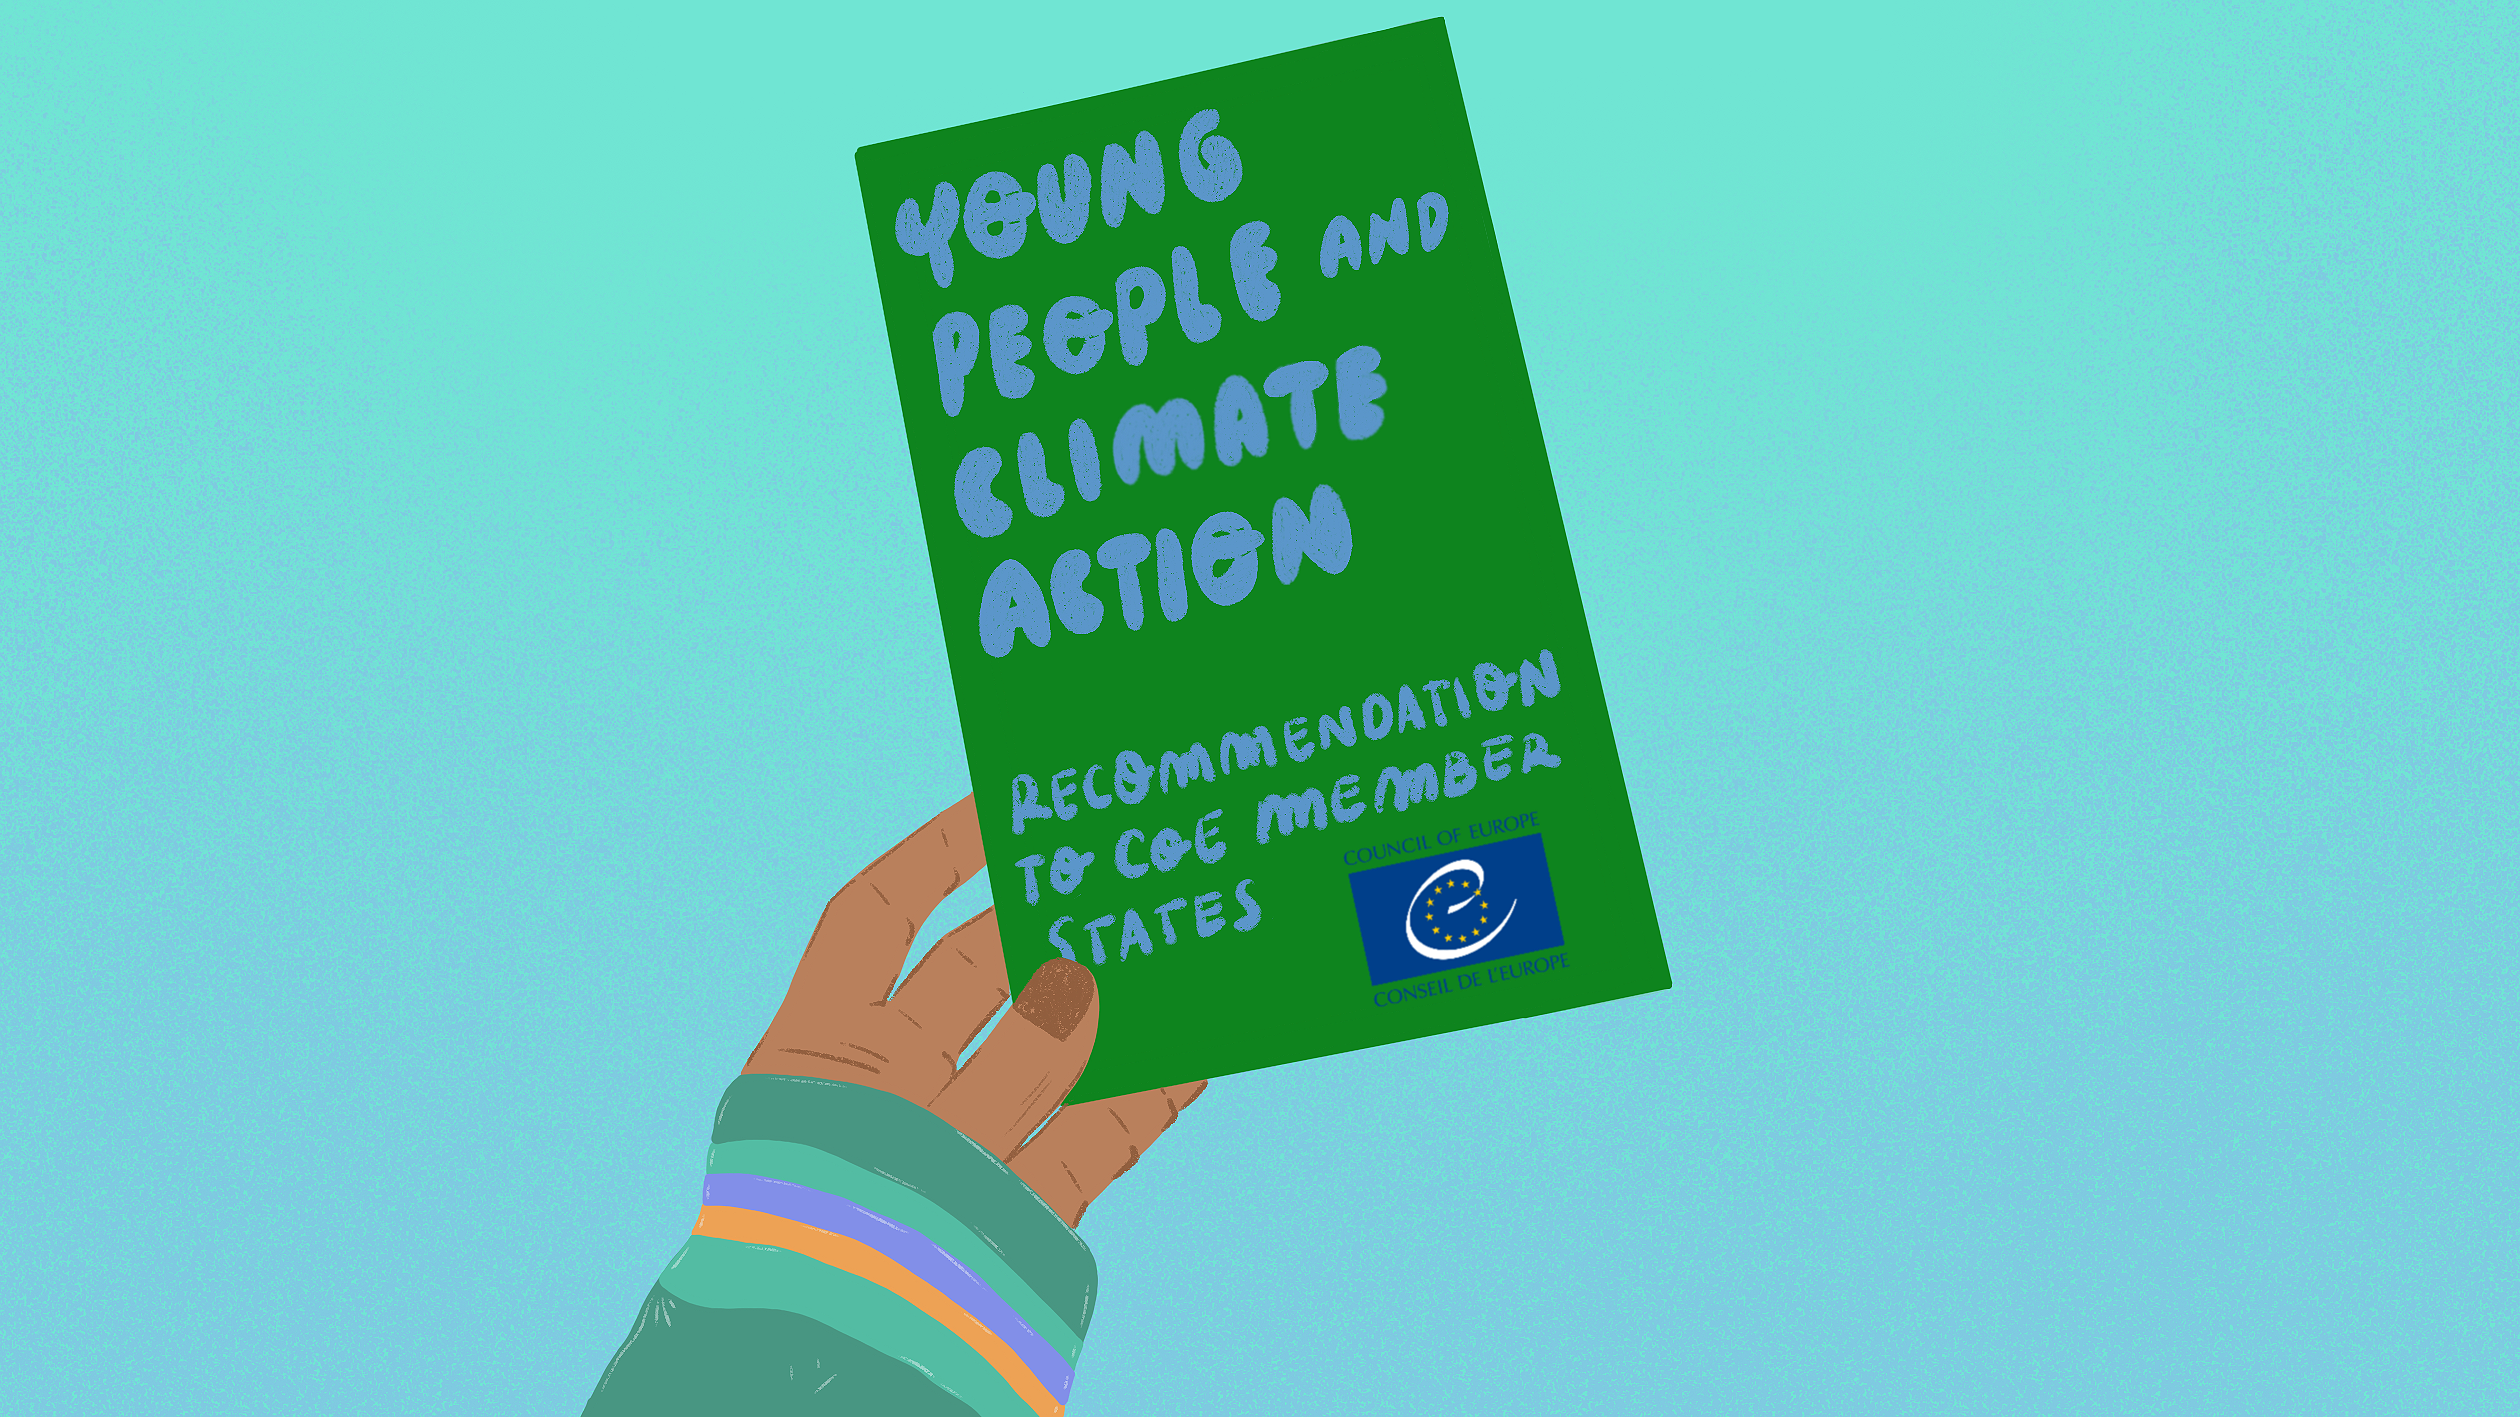 Young people and climate action: a recommendation to the Council of Europe member states